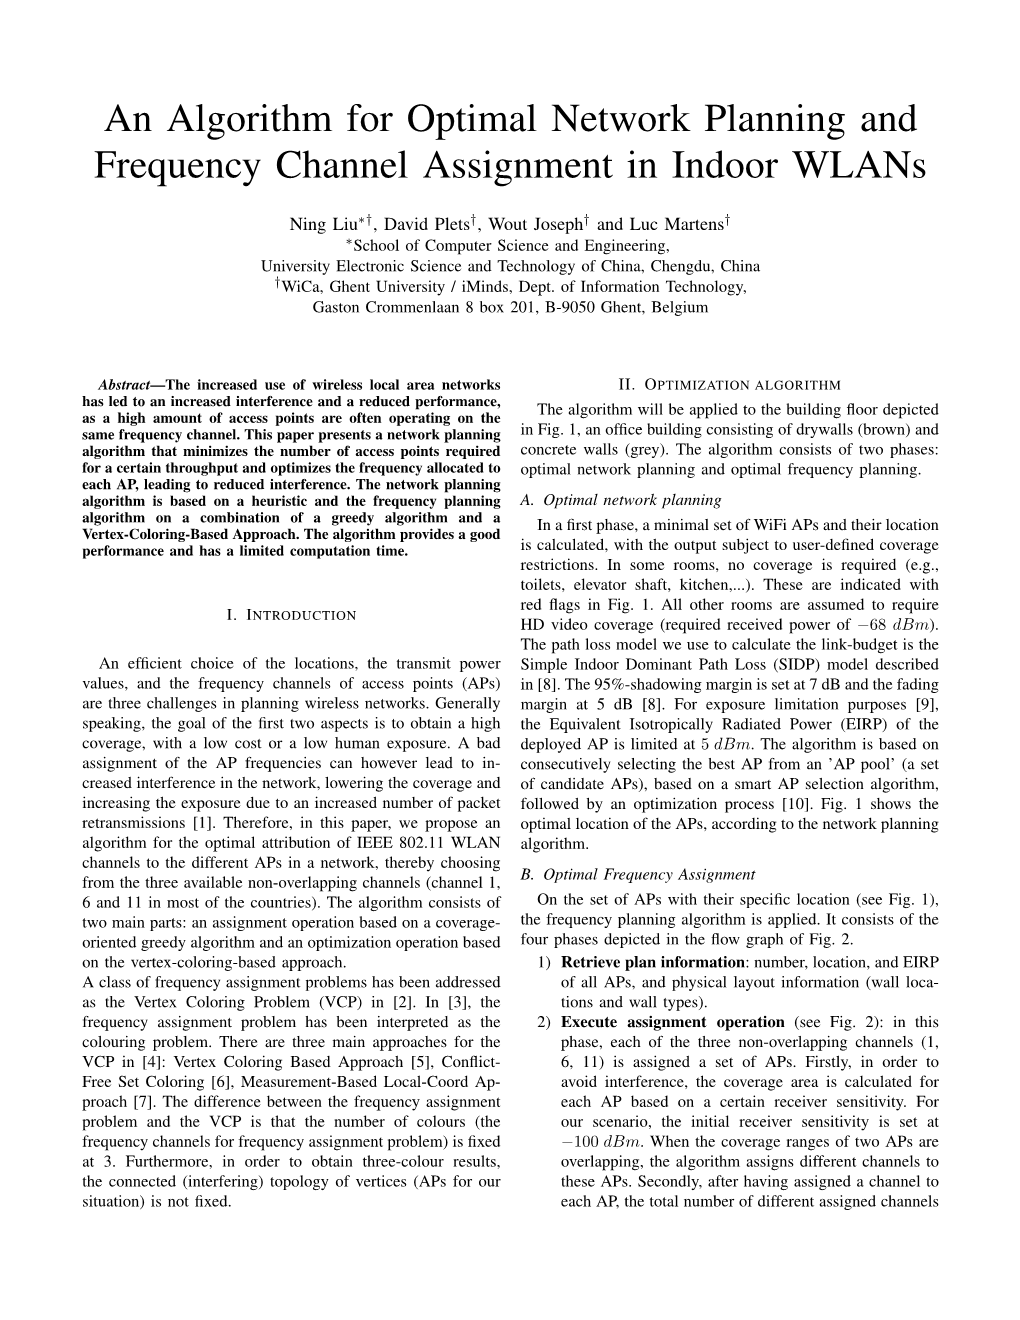 An Algorithm for Optimal Network Planning and Frequency Channel Assignment in Indoor Wlans